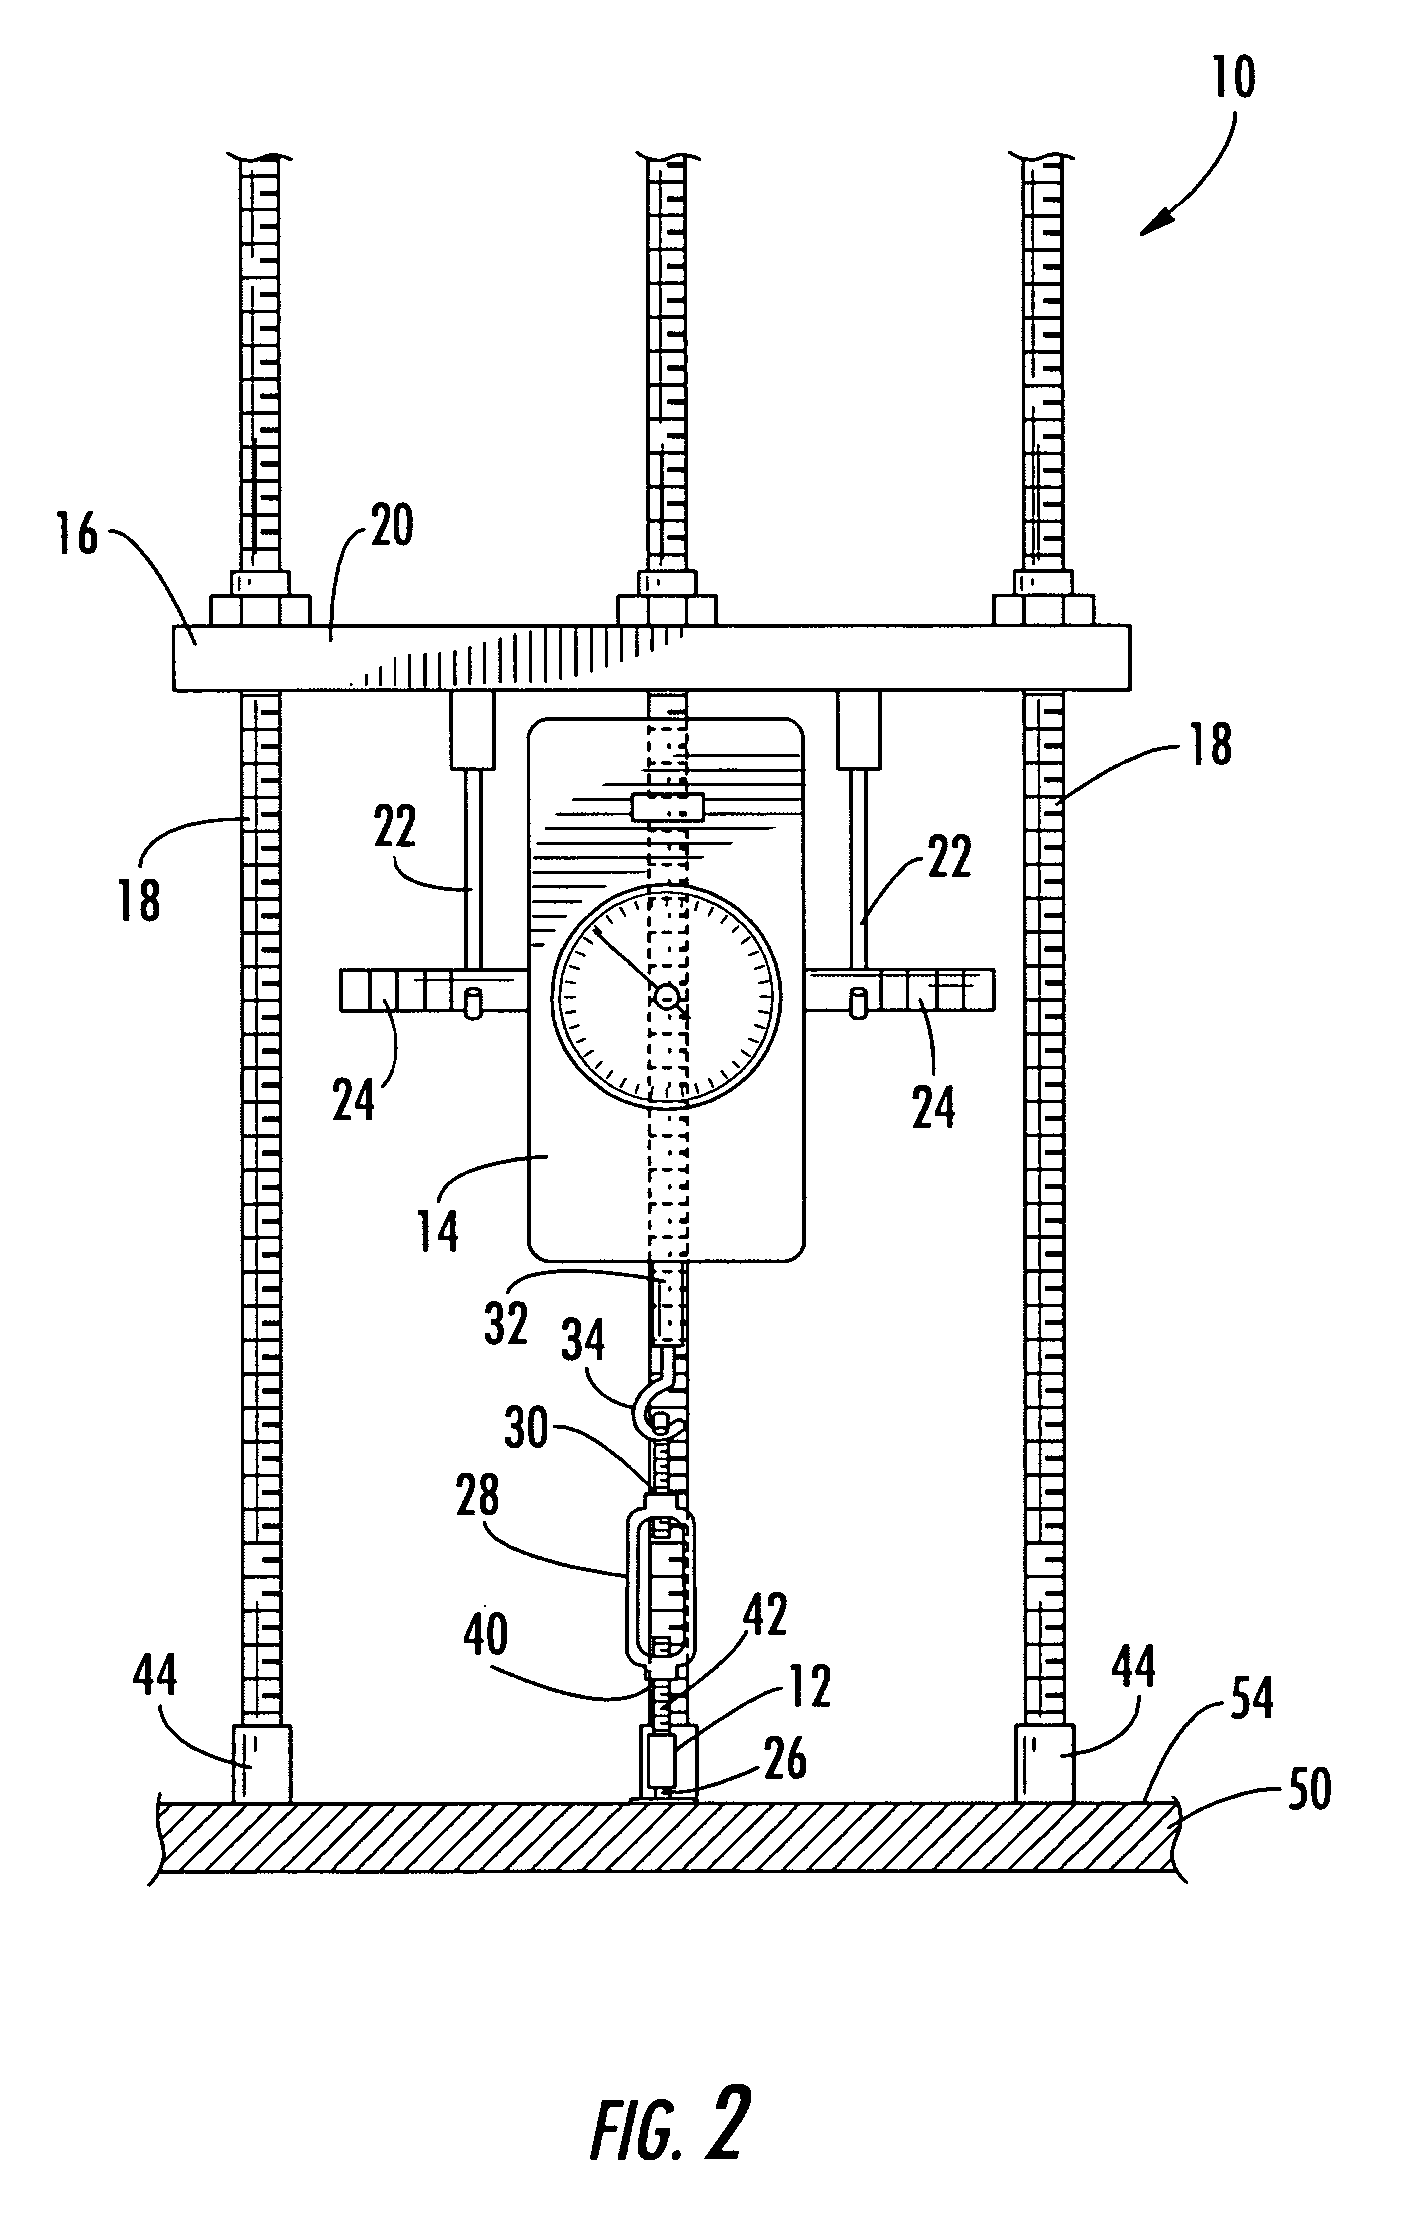 Loading device for non-destructive inspections of composite structures